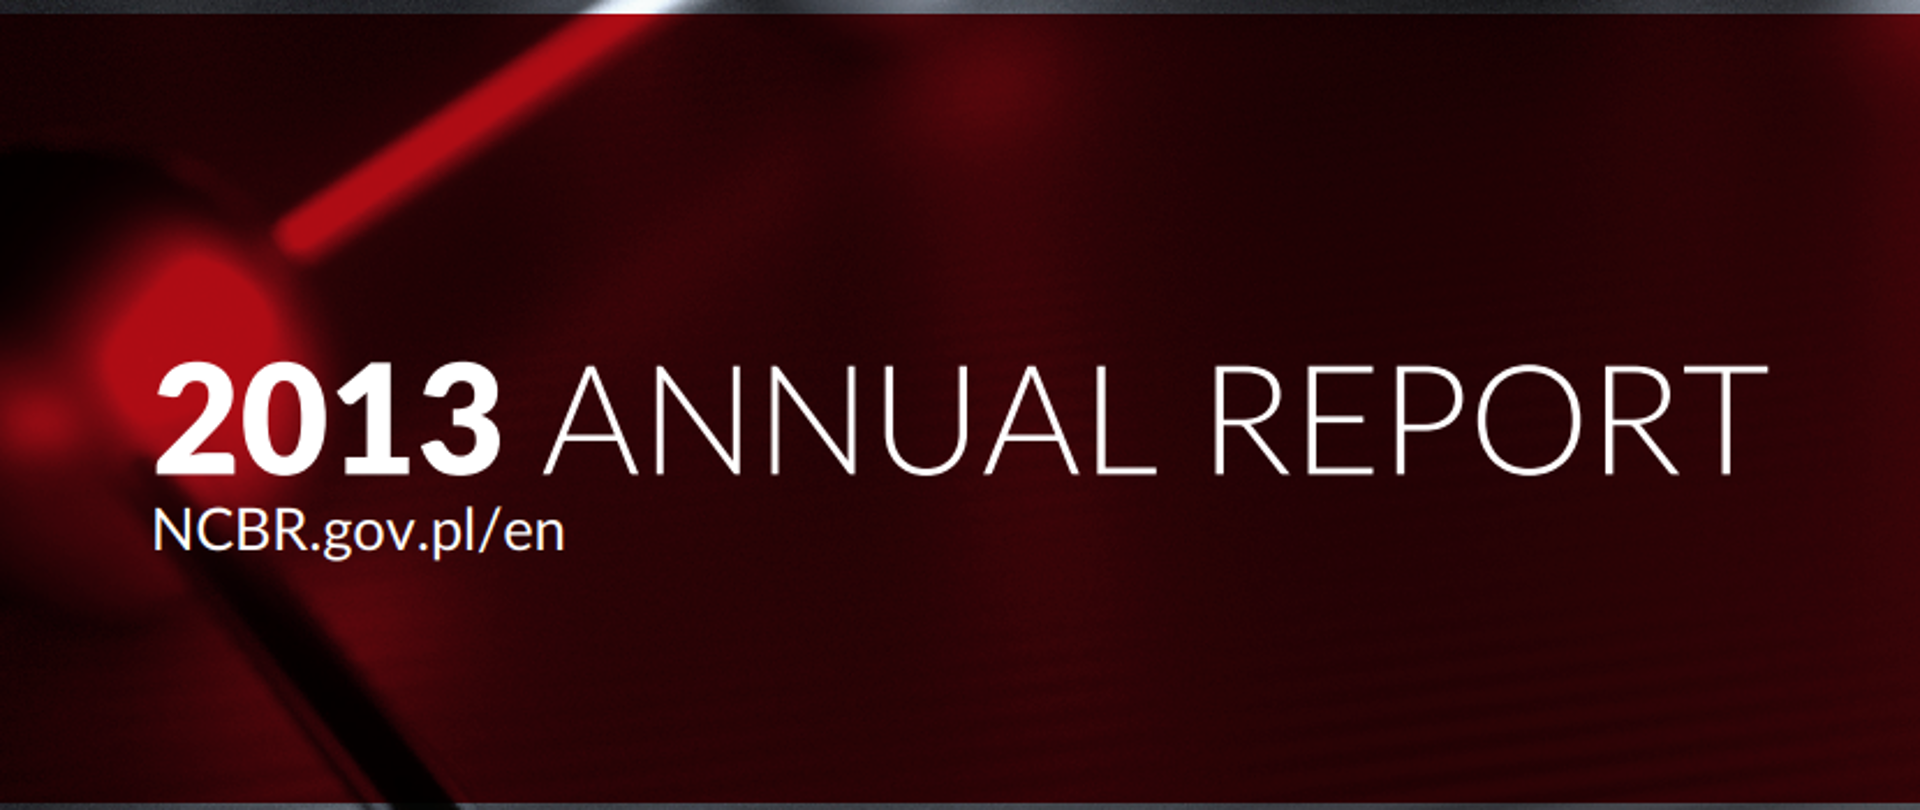 The inscription 2013 Annual Report on a red background, the rest of the background consists of spheres
